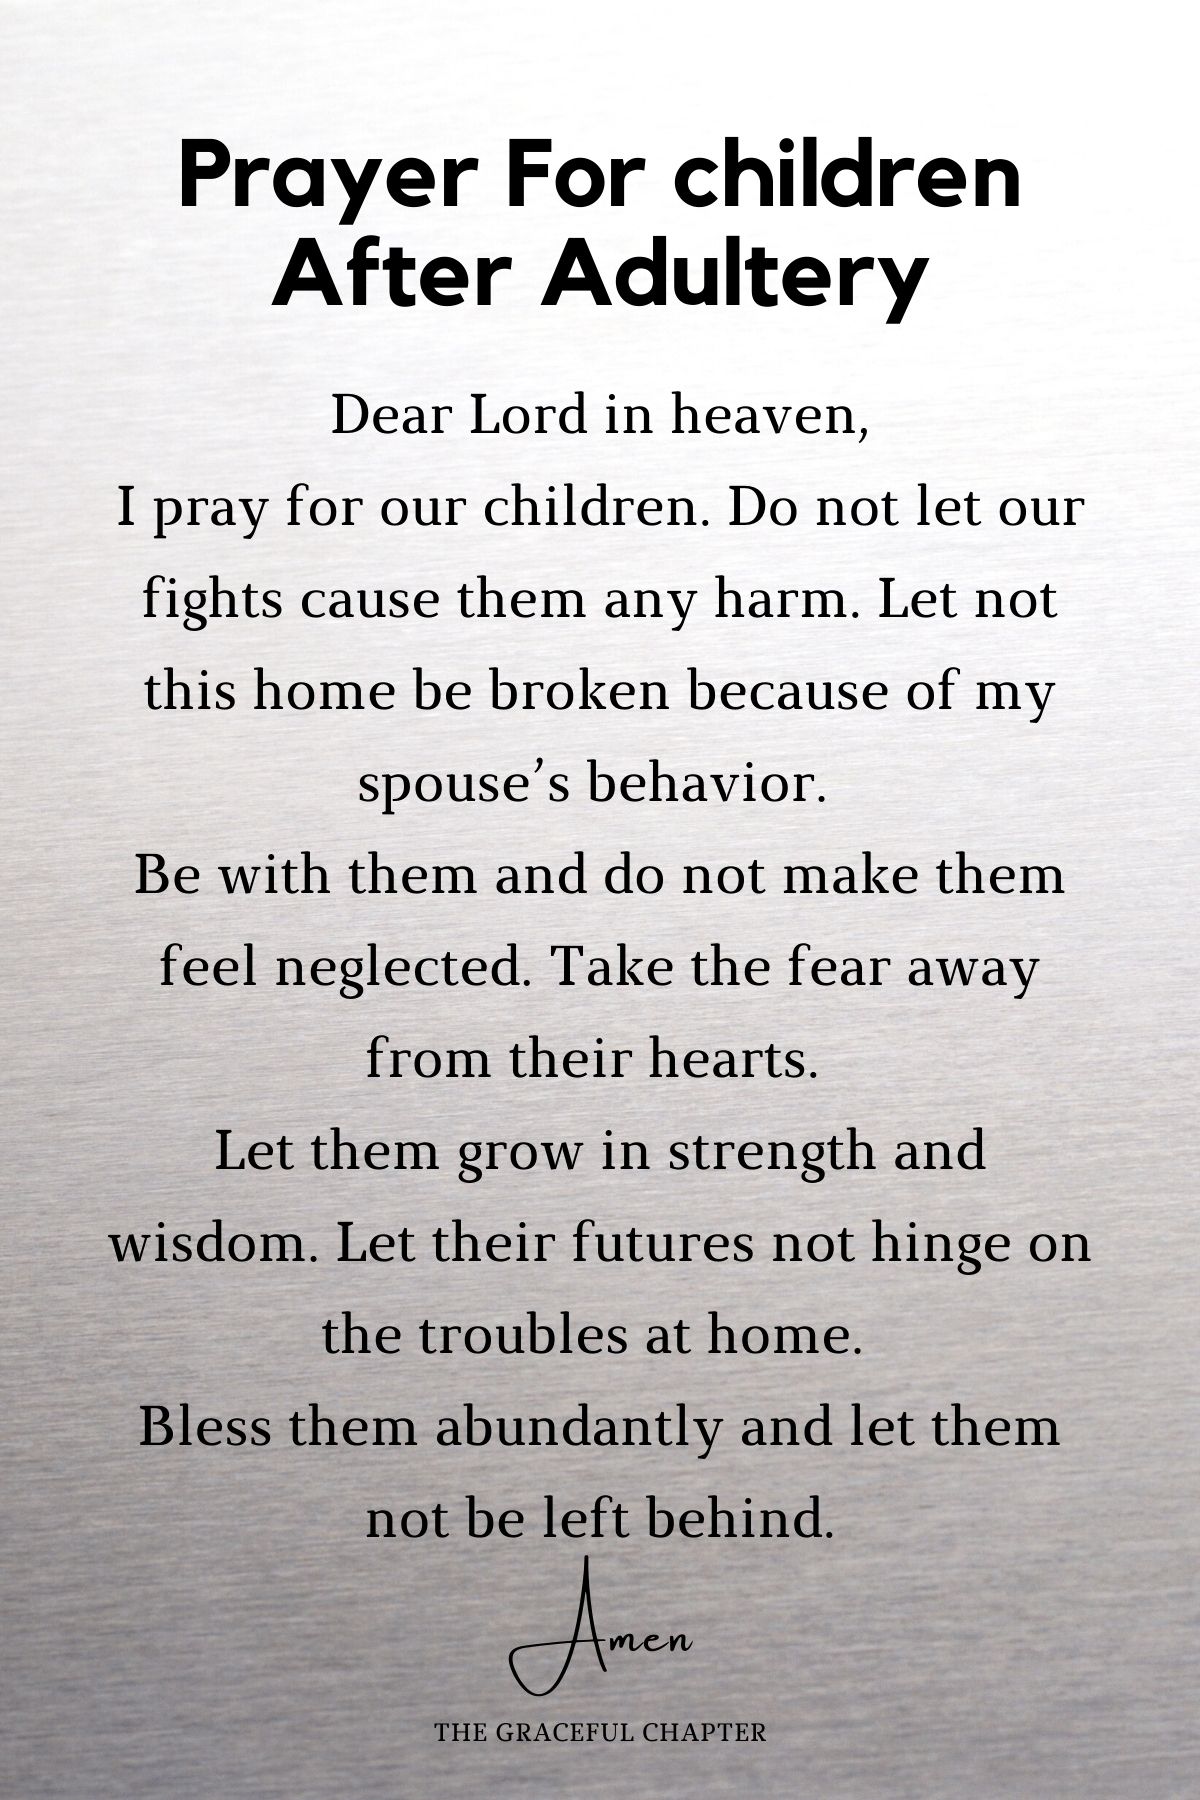 Prayer for children after adultery